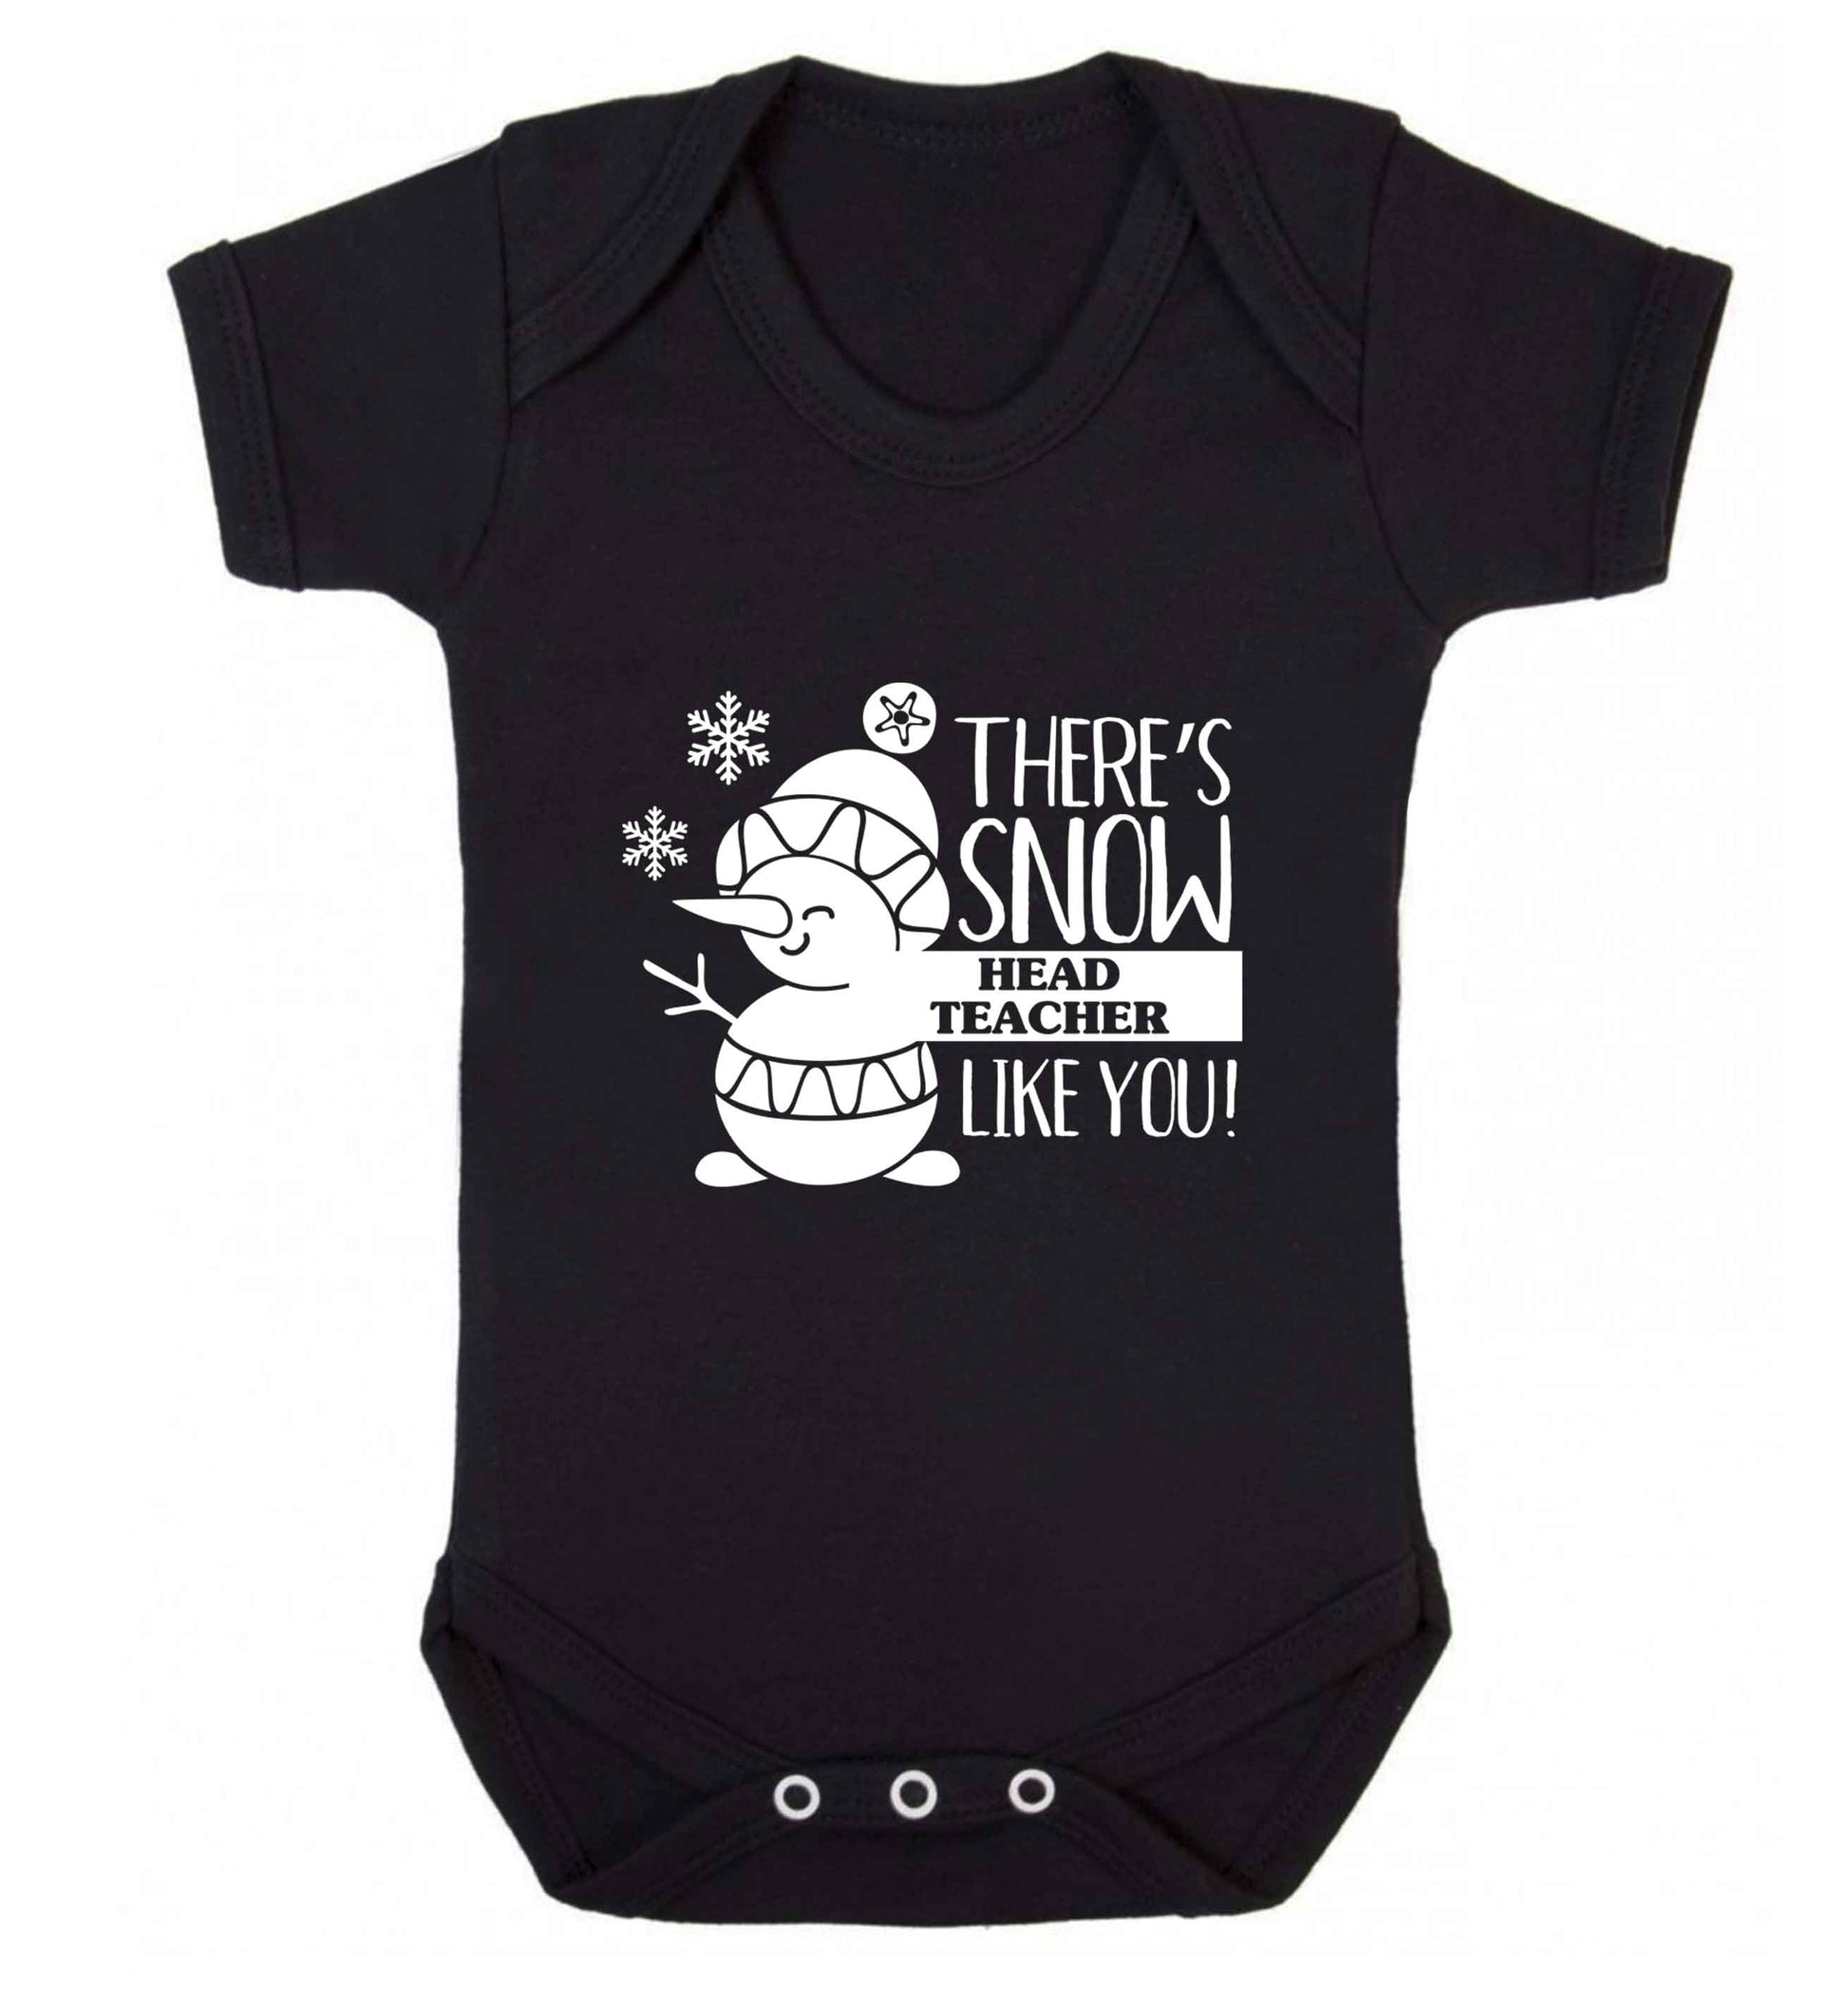 There's snow head teacher like you baby vest black 18-24 months